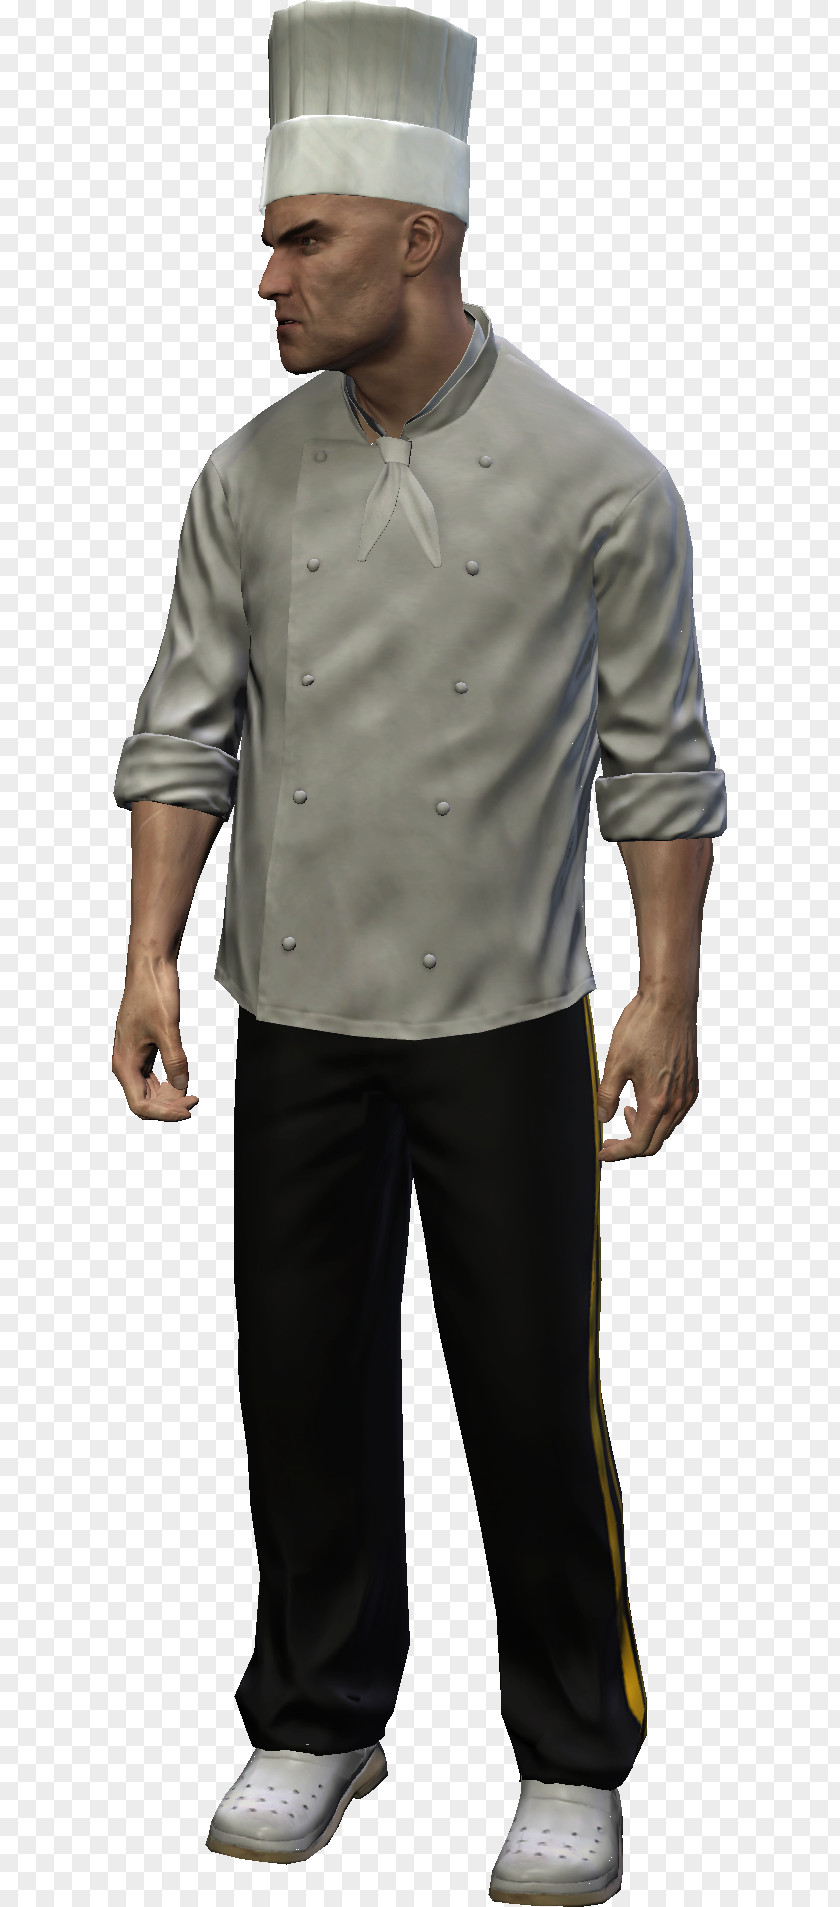 Chef Hitman: Absolution Codename 47 PlayStation 4 Agent PNG